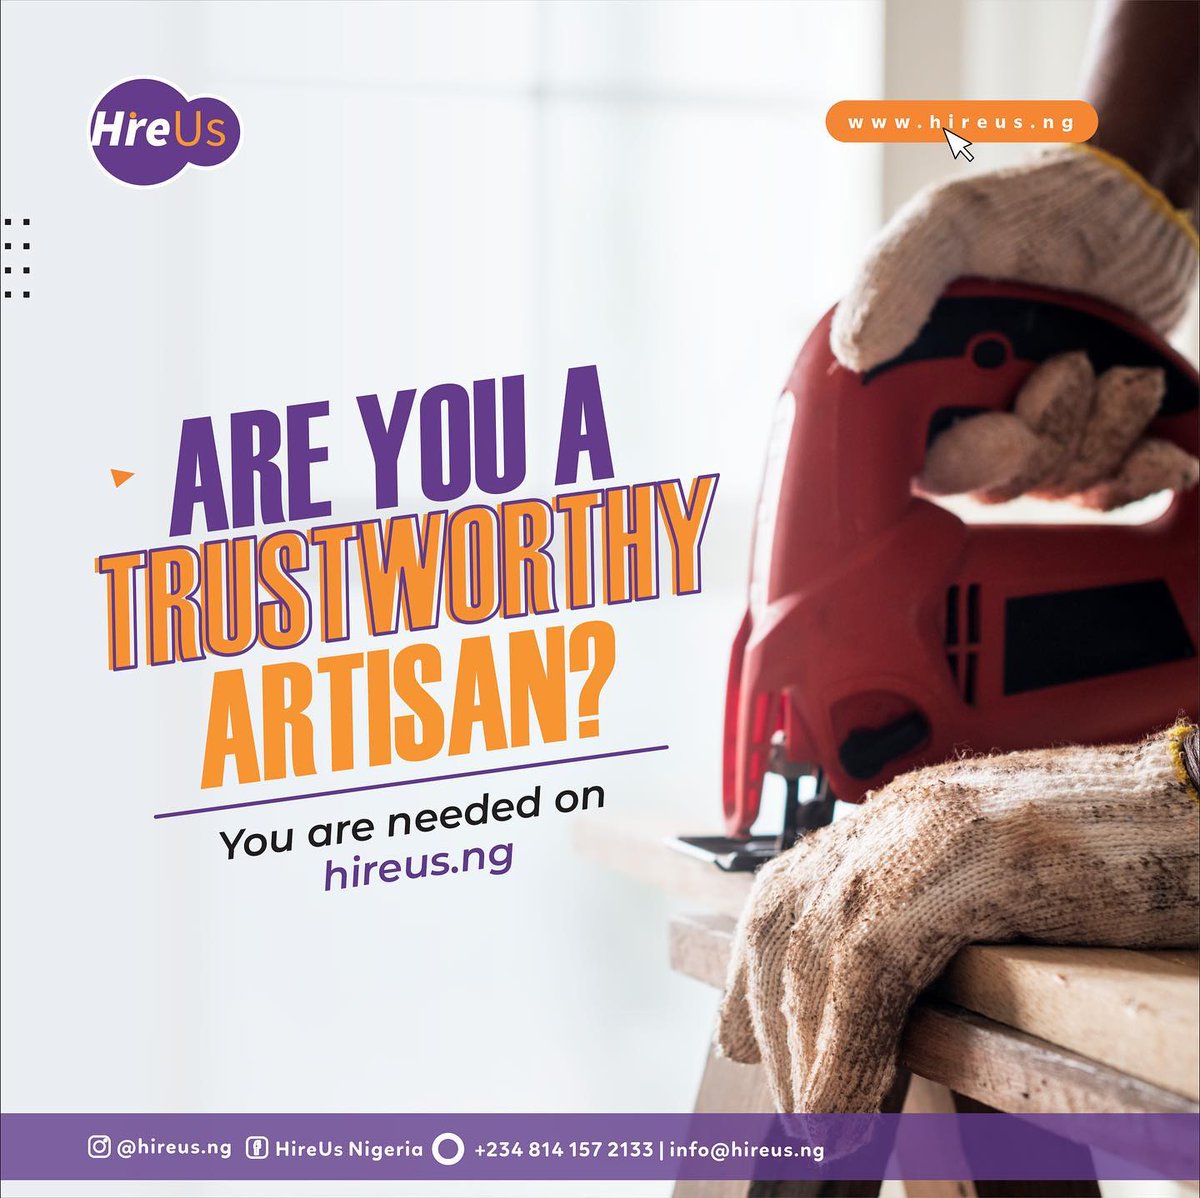 kindly download our app from play store and register your services. #Artisan #Handmade #Craftsmanship #SmallBusiness #Handcrafted #ArtisanCommunity #ArtisanCrafts #LocalArtisans #ServiceProviders #SkilledArtisans #Craftsman